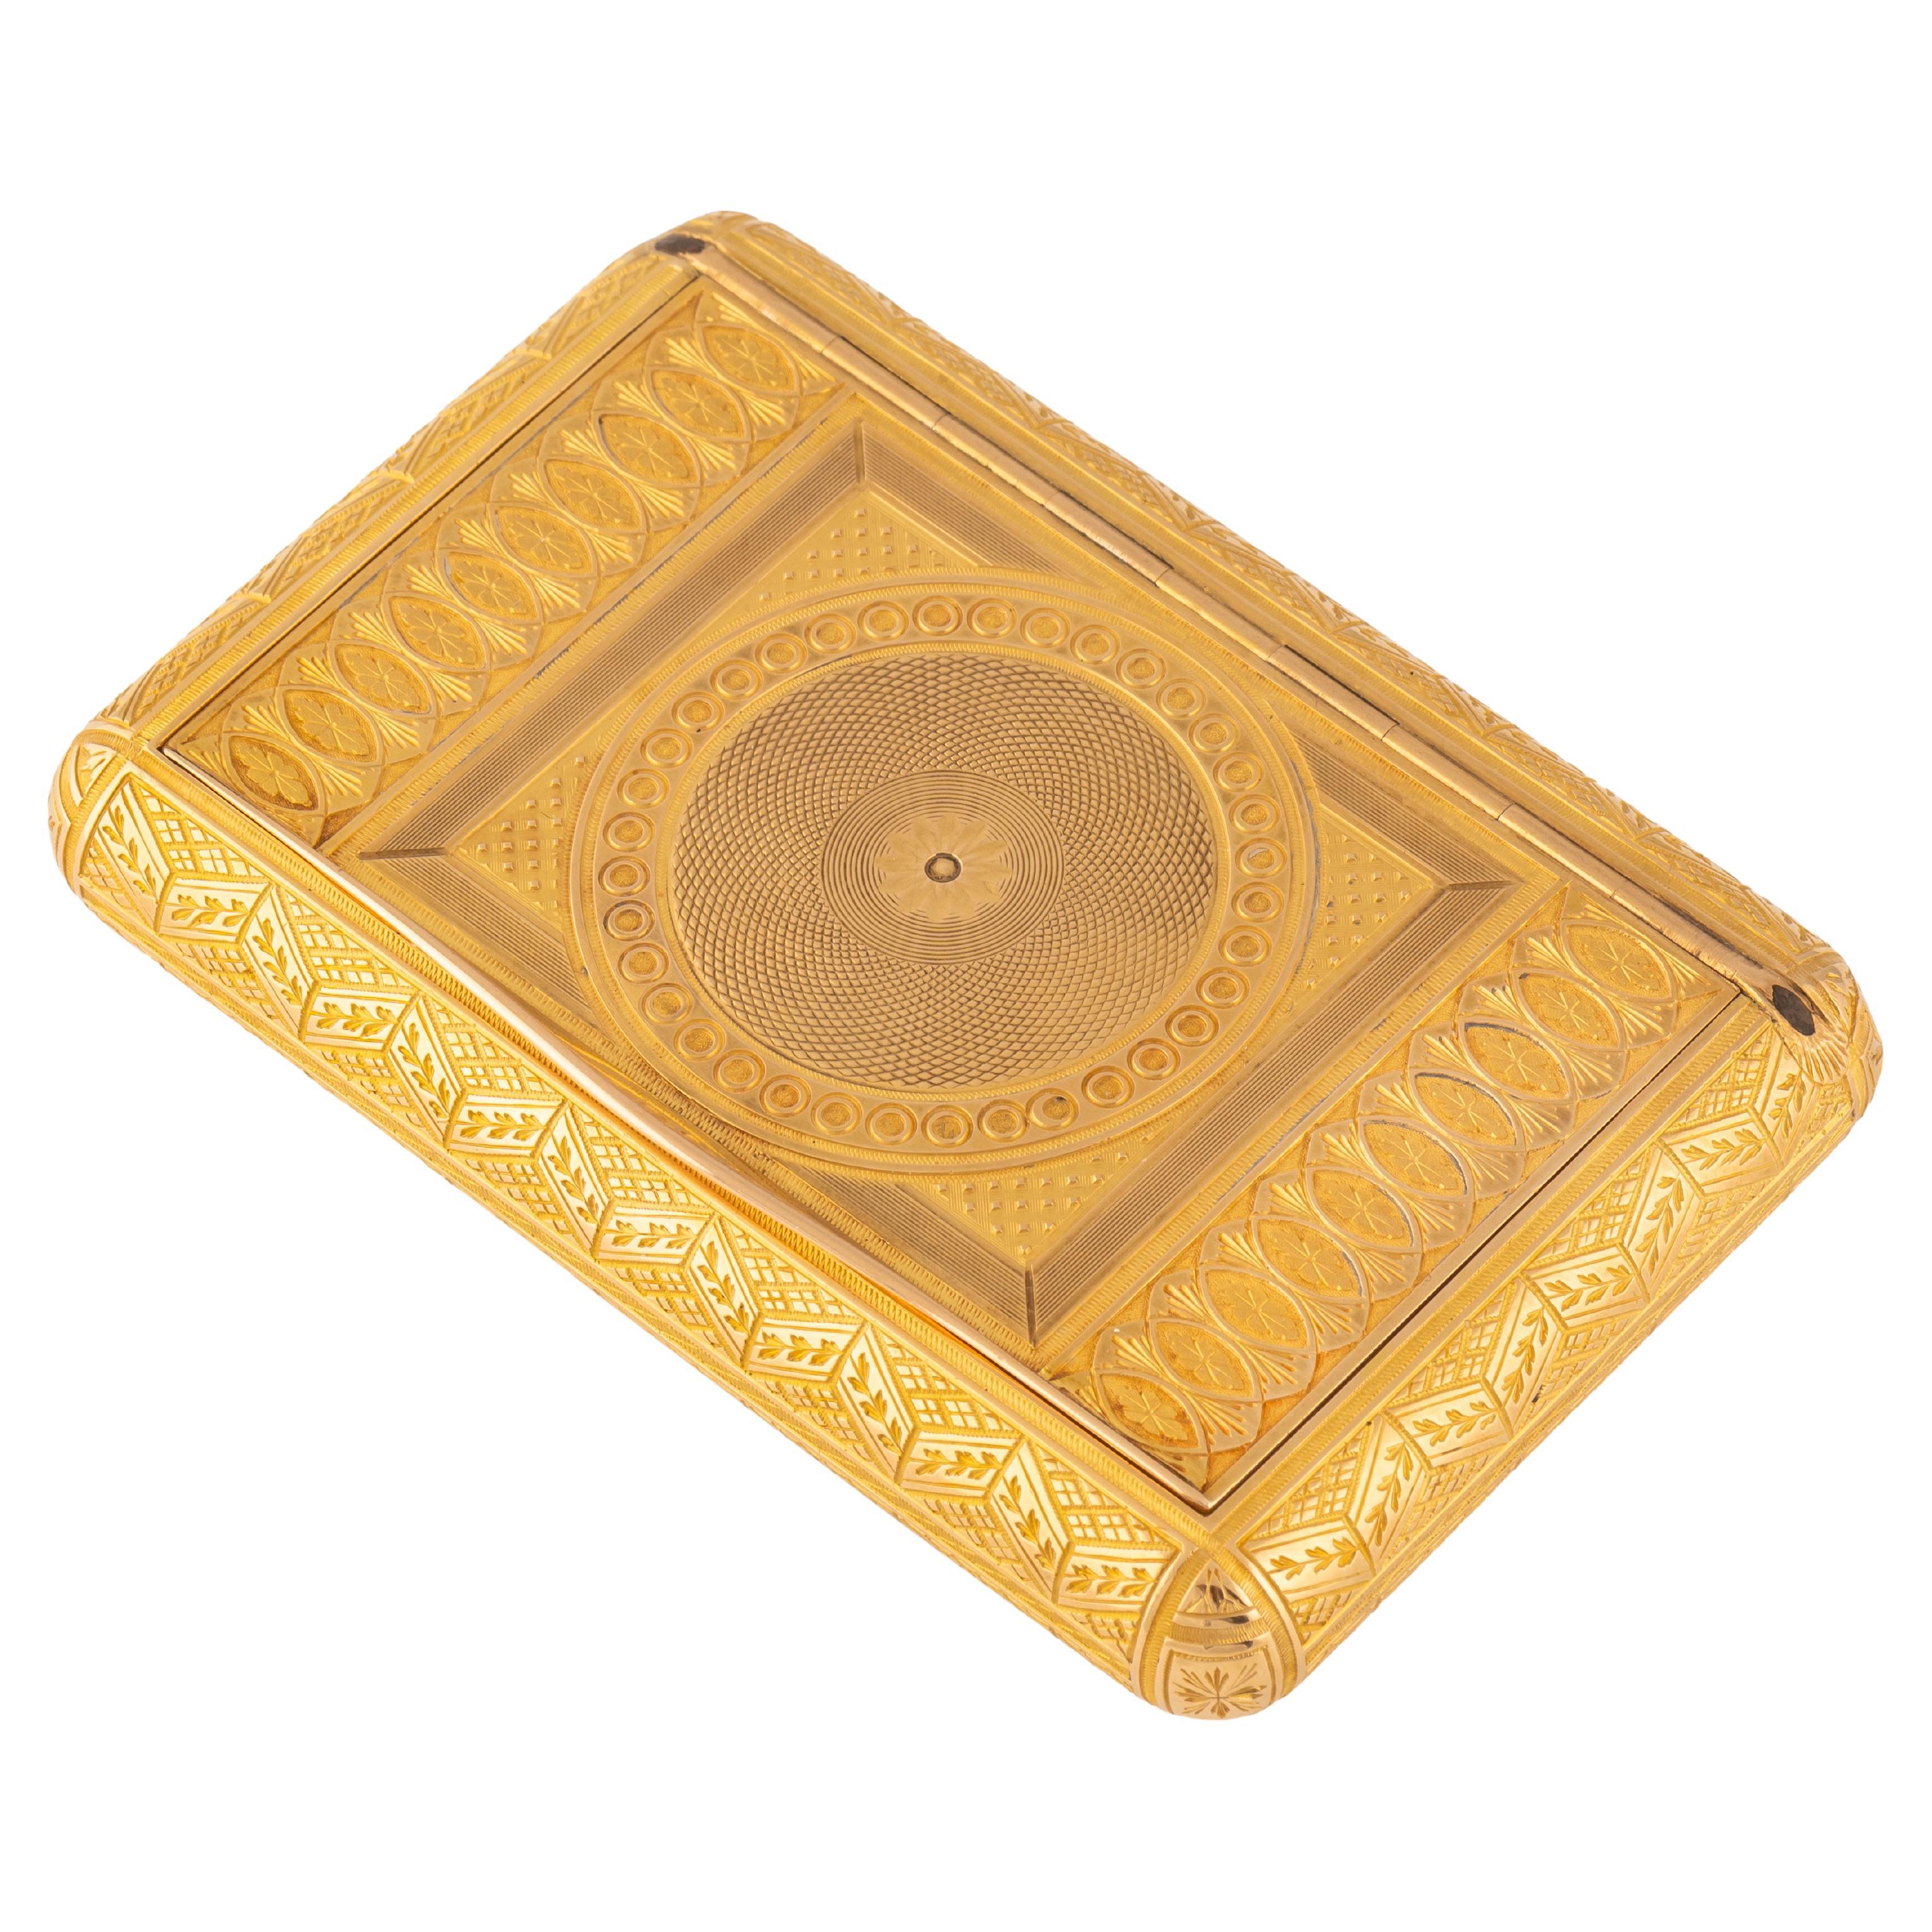 Russian Imperial-era Gold Snuff Box by Keibel, St. Petersburg, circa 1820 For Sale